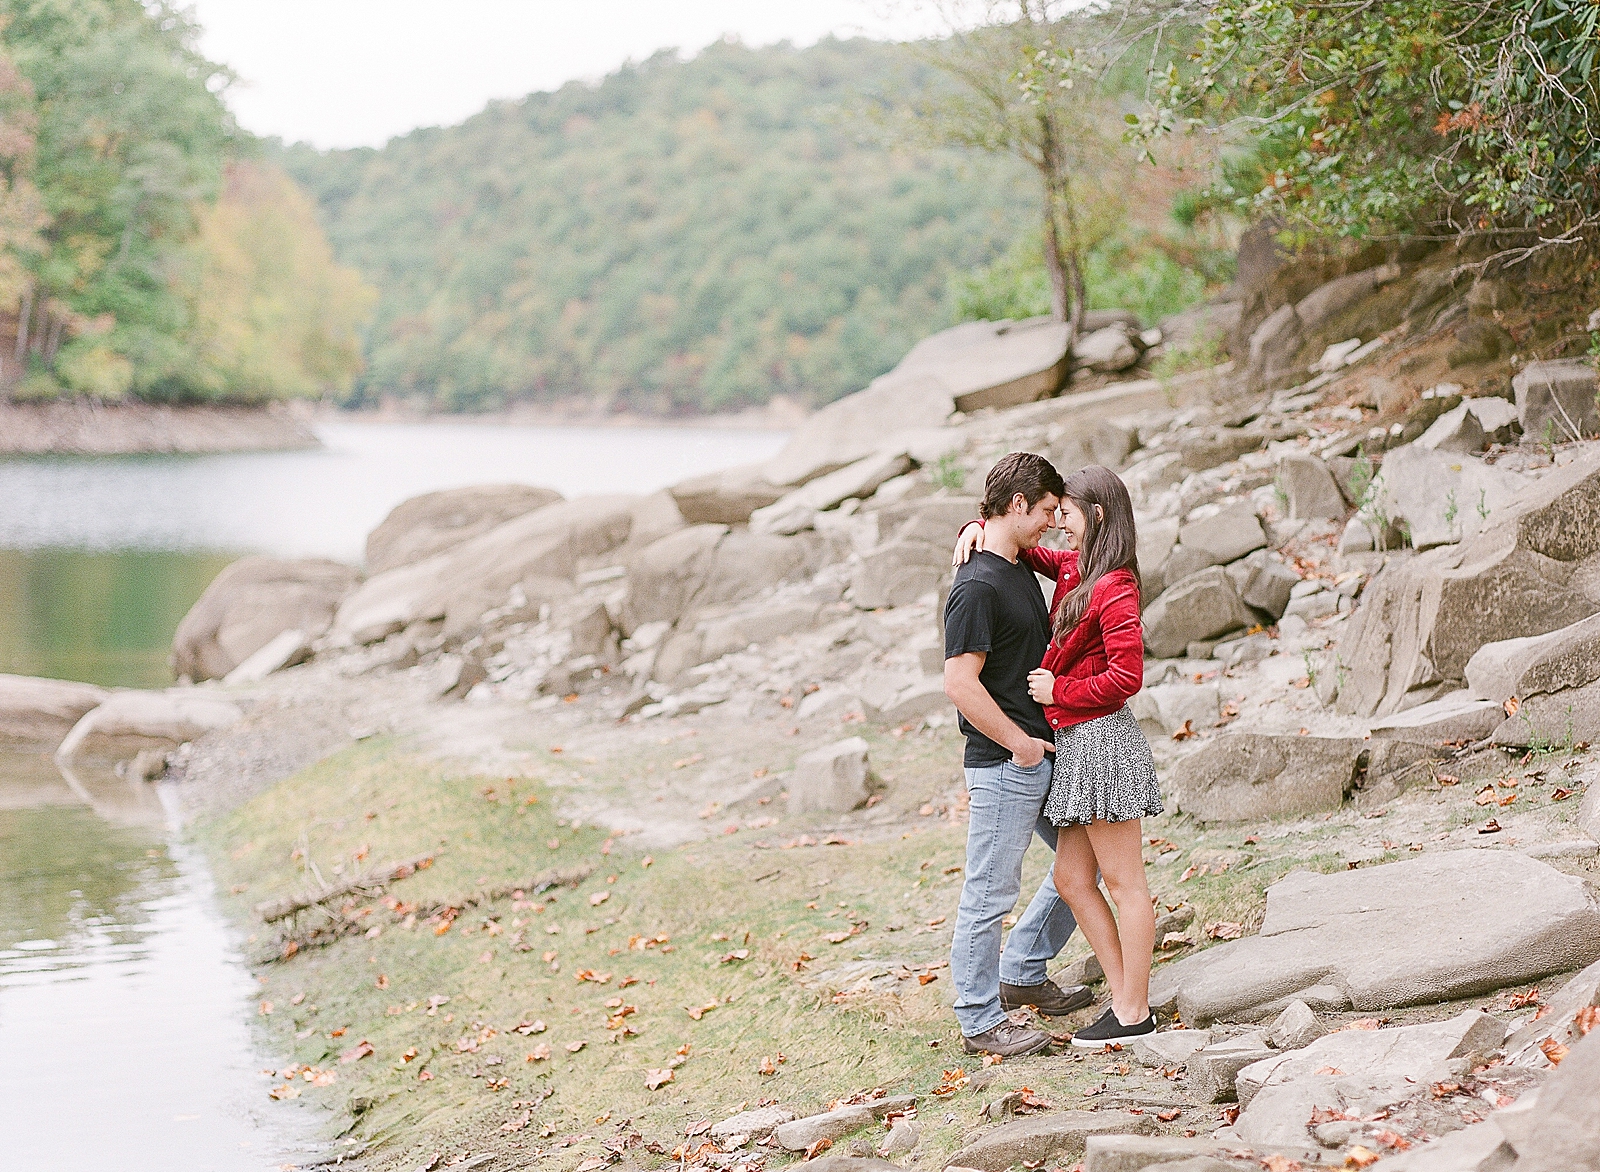 Mountaintop Engagement Couple Nose to nose on Rocks at lake Photo 